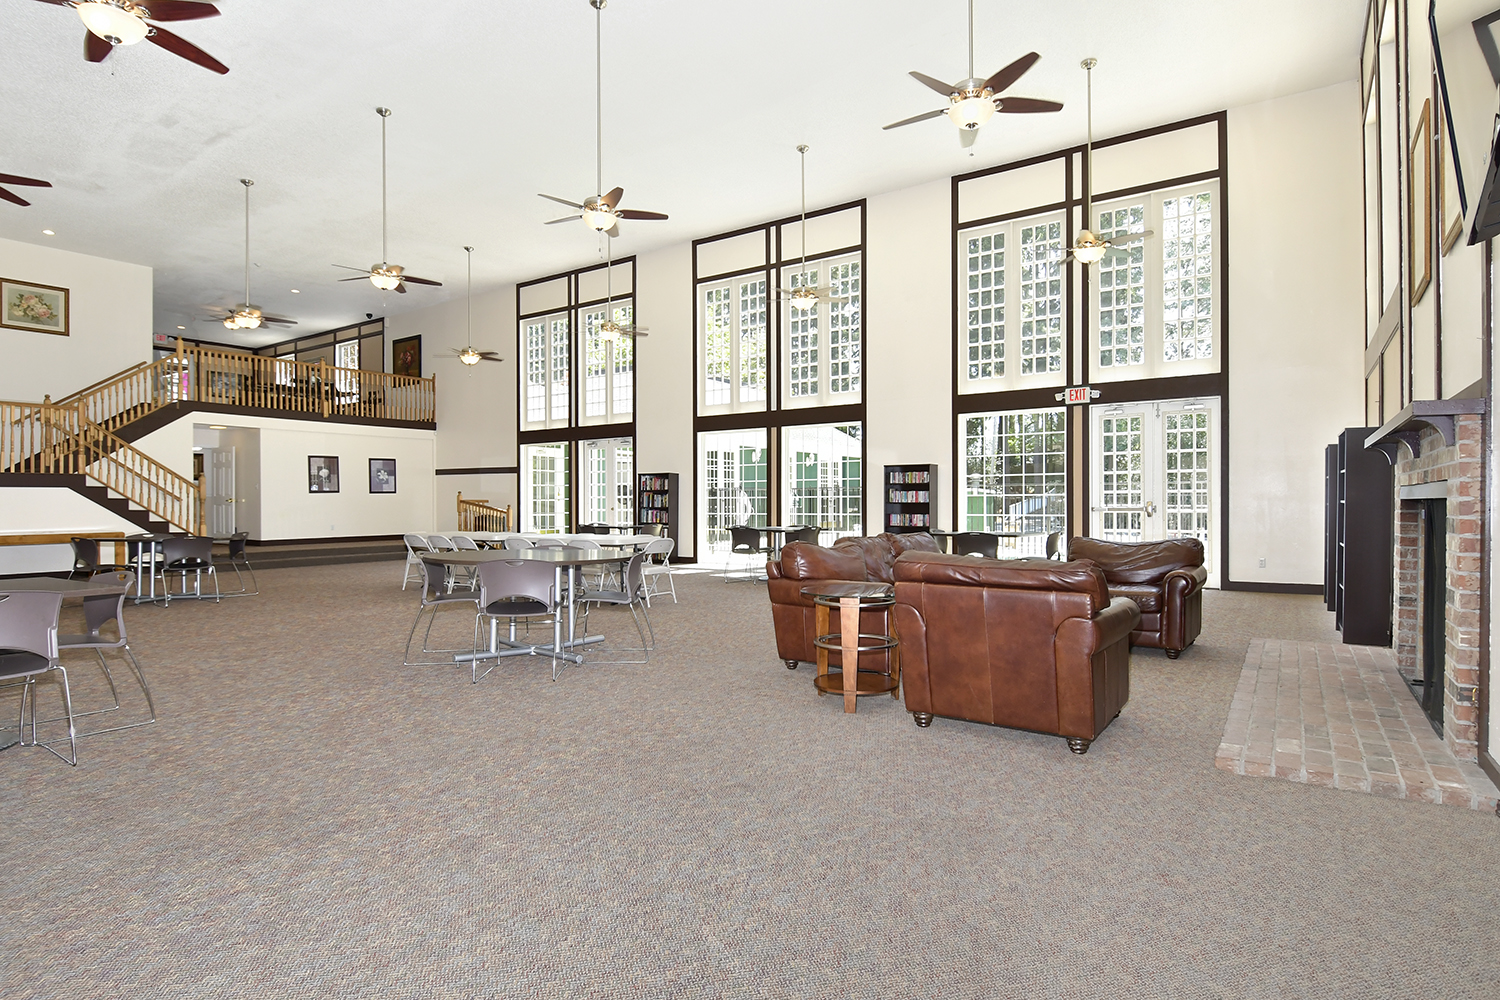 Large community room with tall ceiling and floor to ceiling windows. Tables and chairs to lounge in. Stairs to the second level.